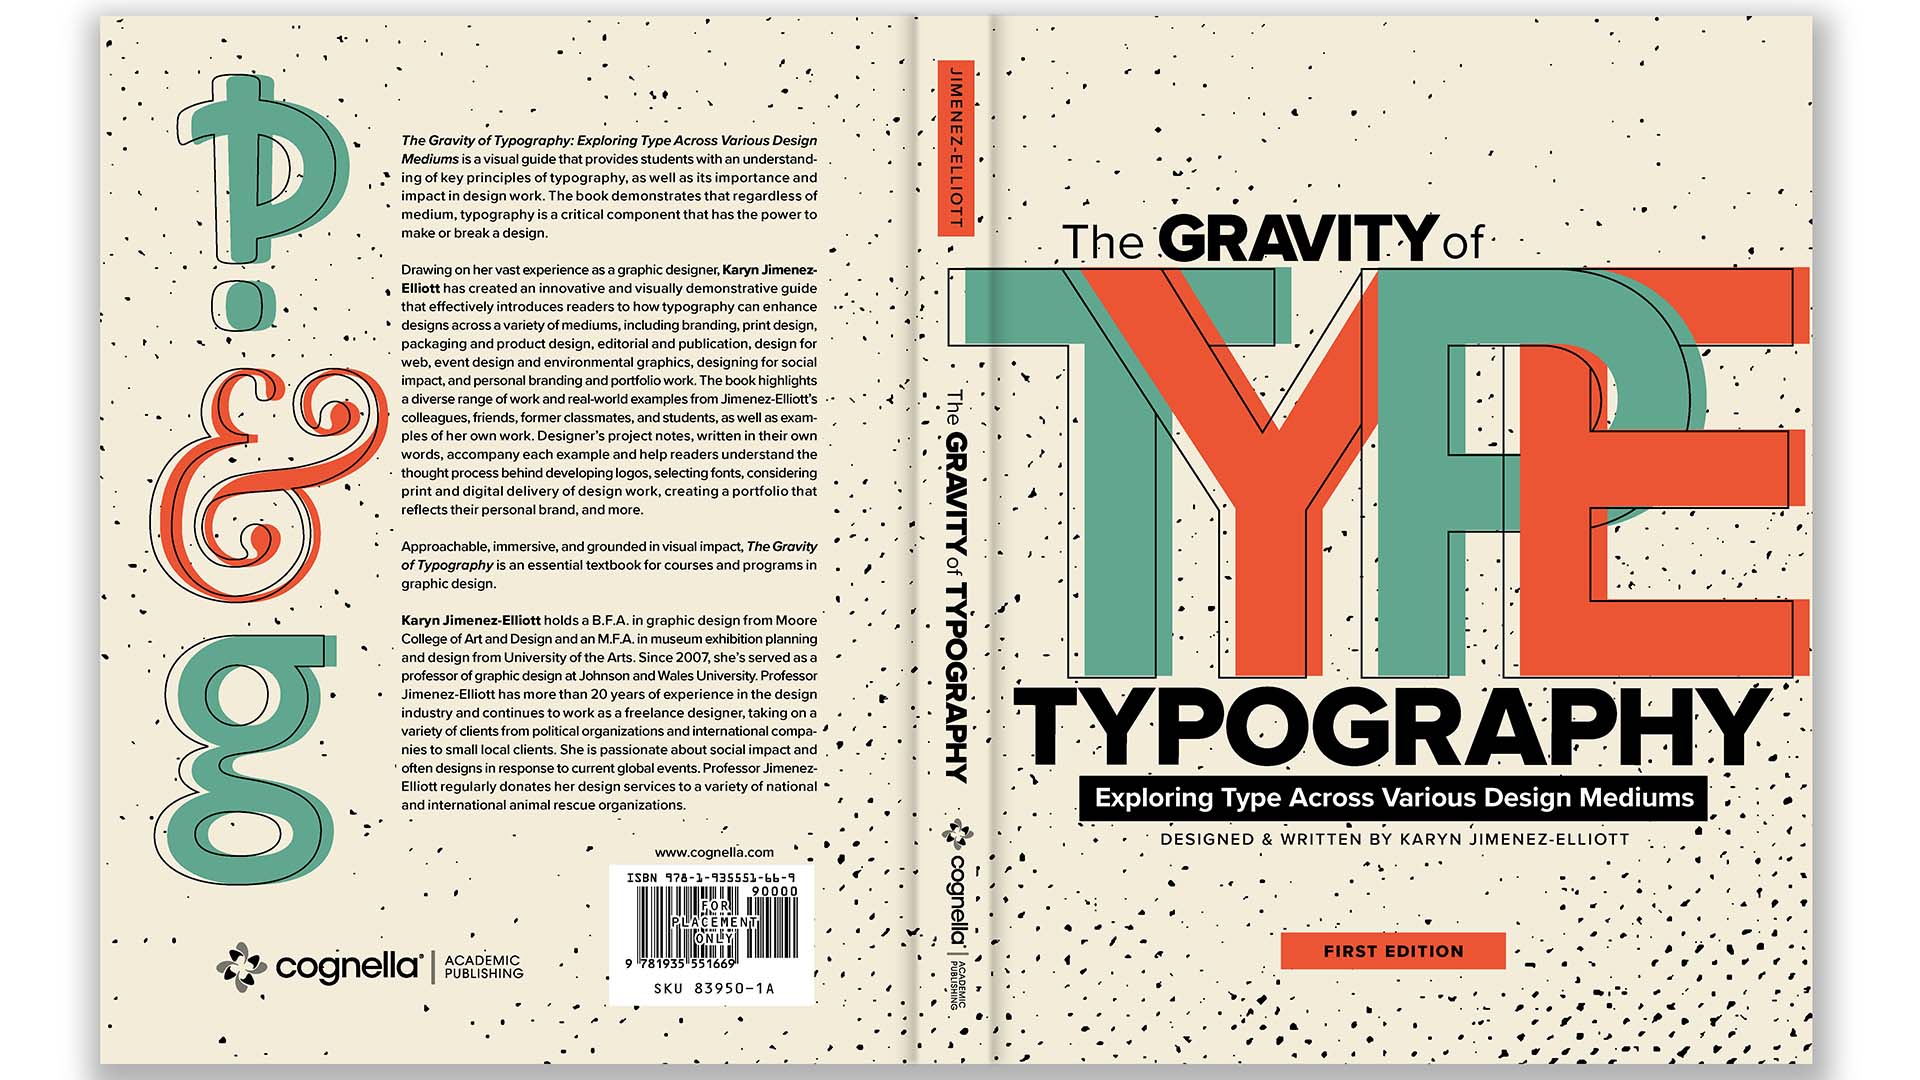 The cover of Karyn Jimenez-Elliot's book, The Gravity of Typography